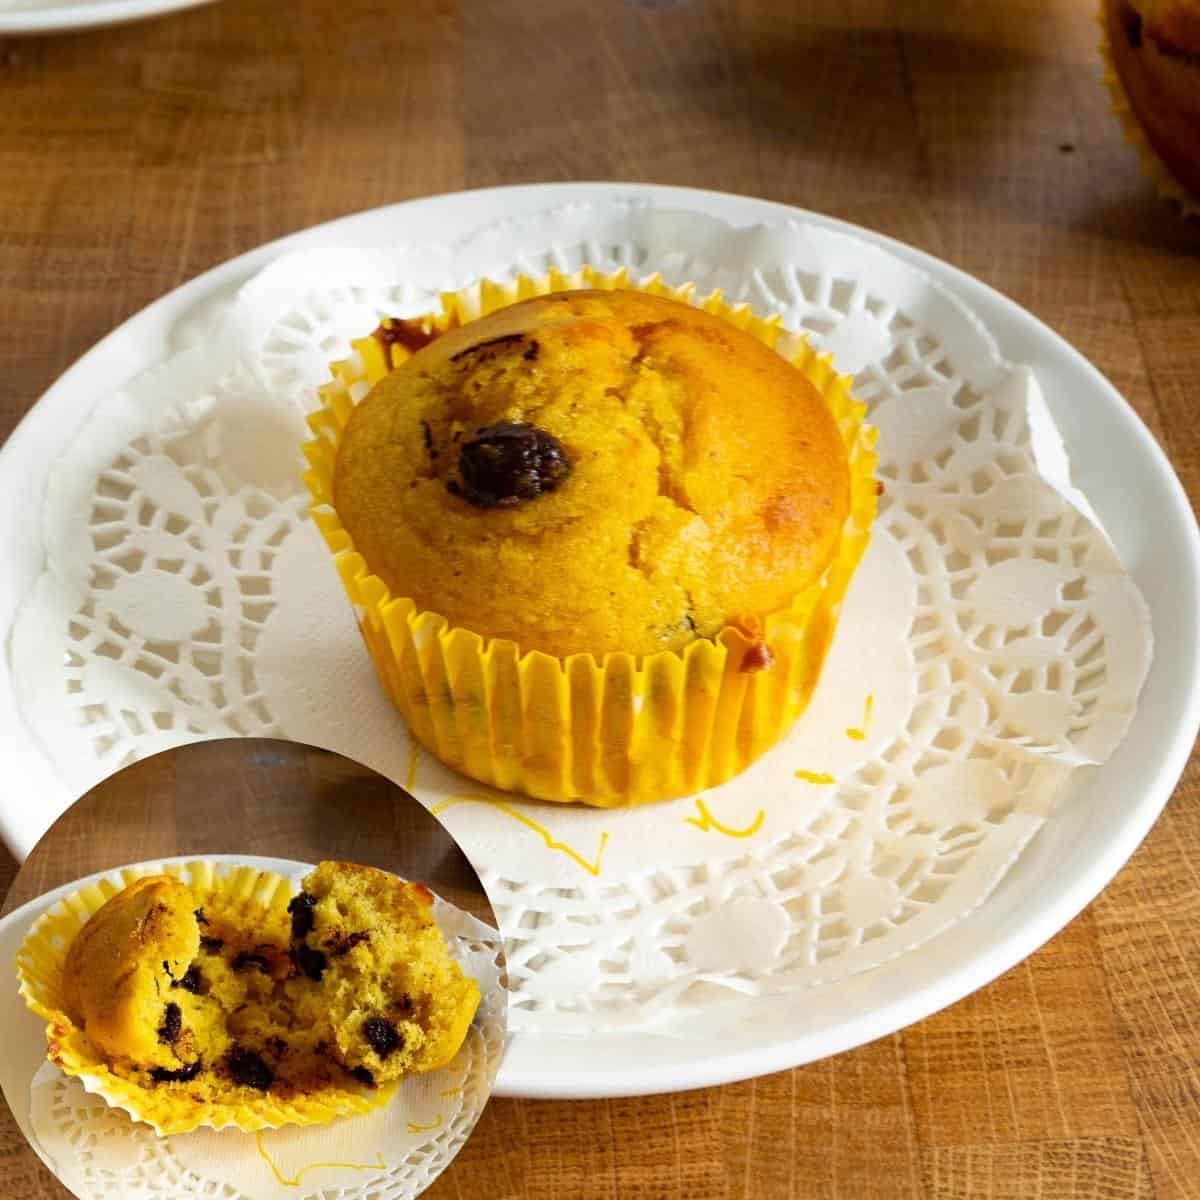 A plate with chocolate chip muffin